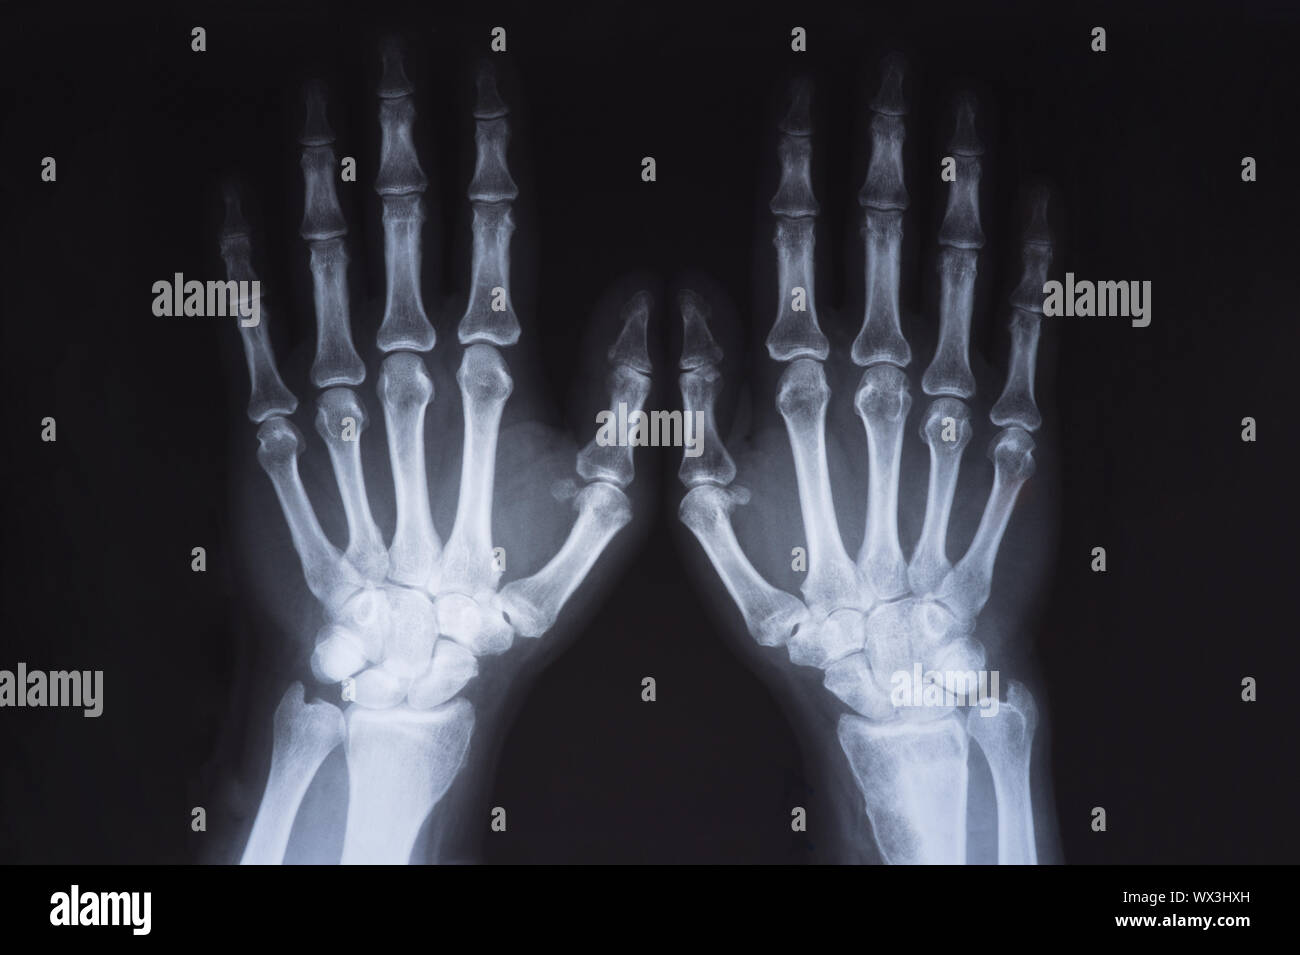 Medical x ray hands image Stock Photo